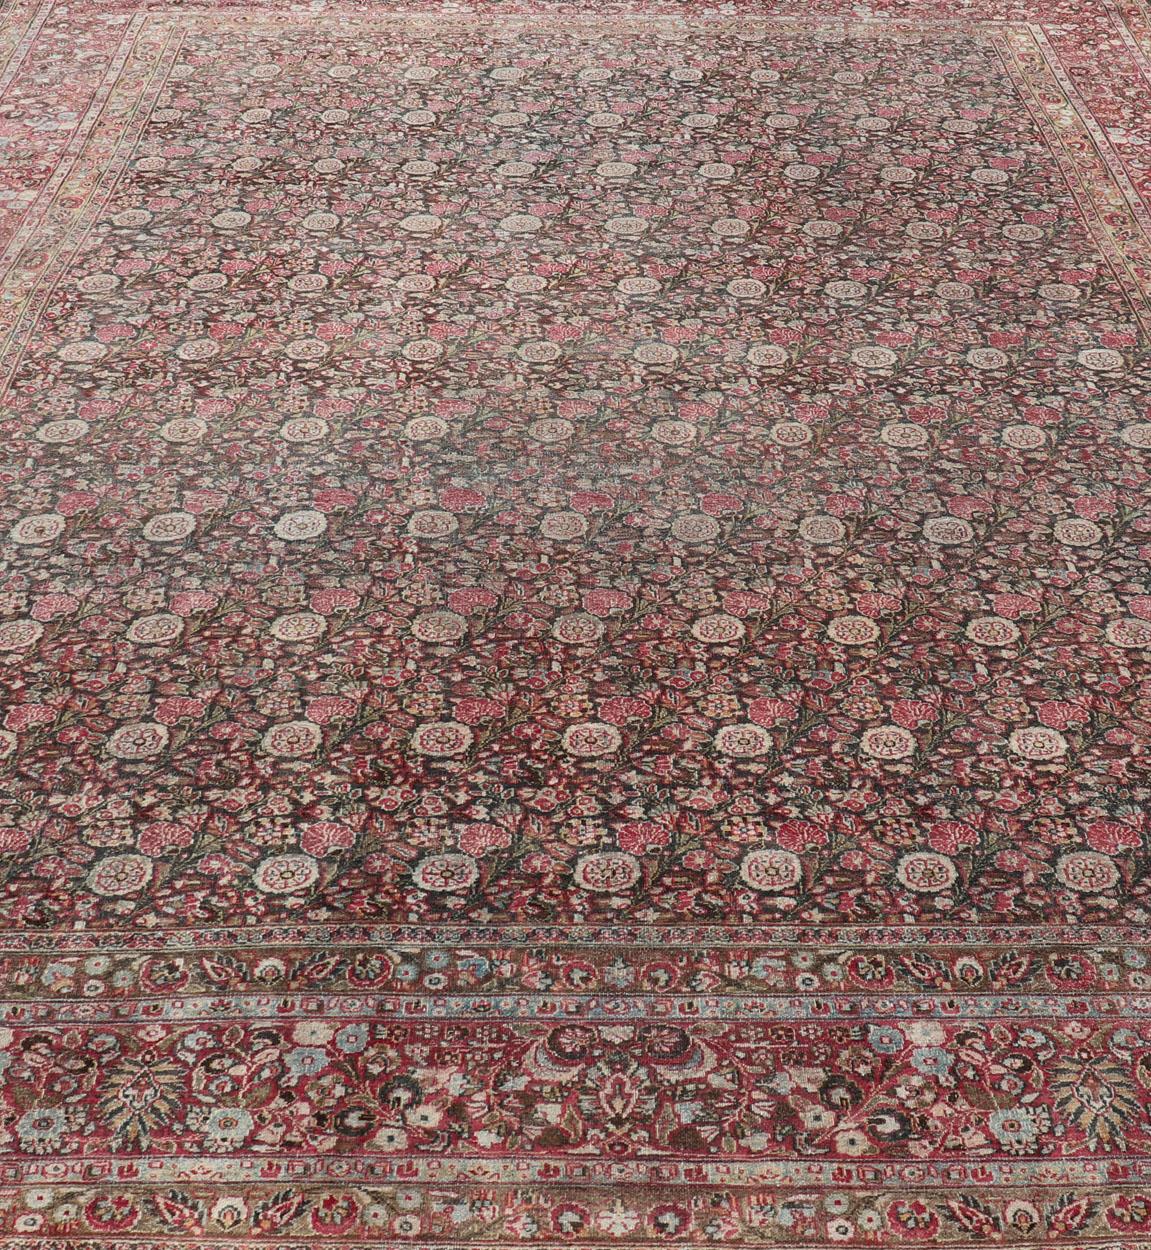 Antique Persian Khorasan Rug with Floral Design in Charcoal, Brown & Rose Red For Sale 1